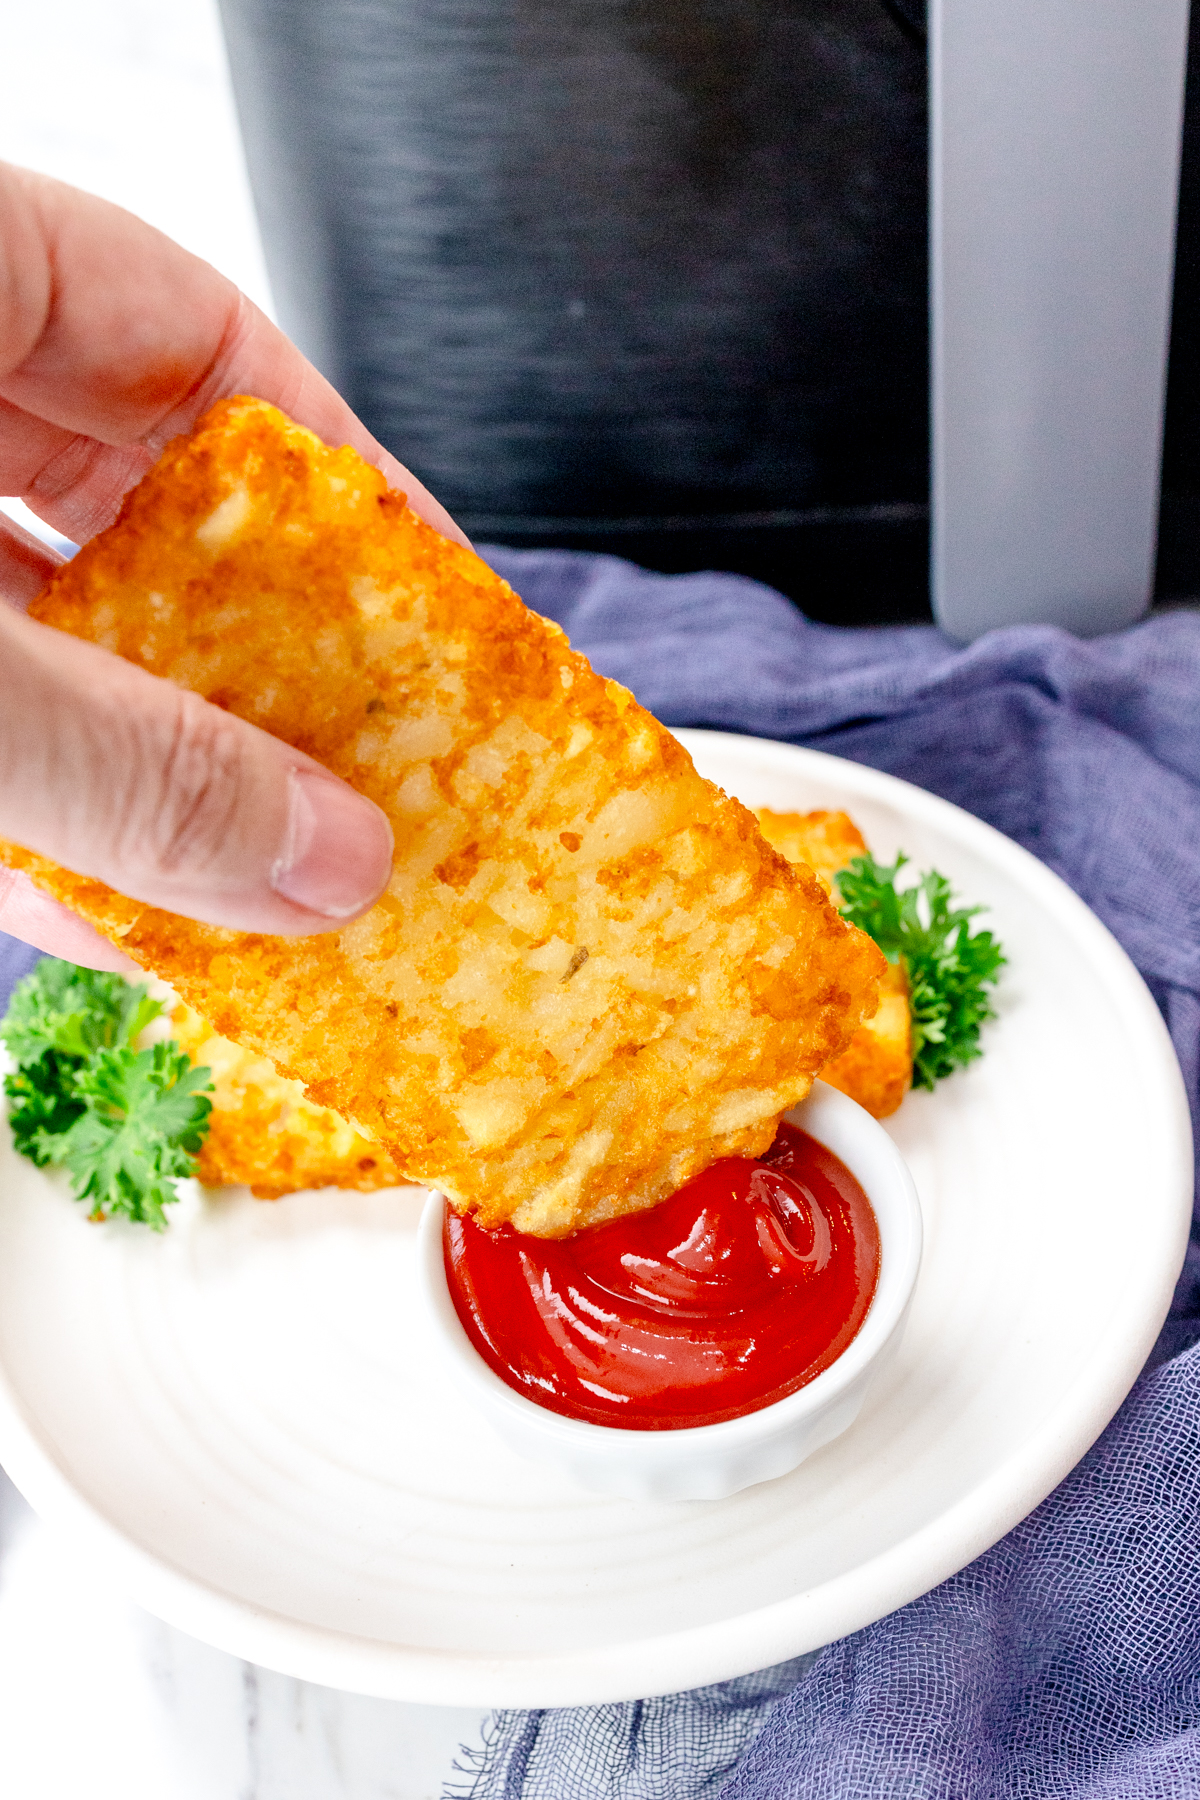 Close up view of a hand dipping a hash brown into a pot of tomato ketchup, on a white plate.